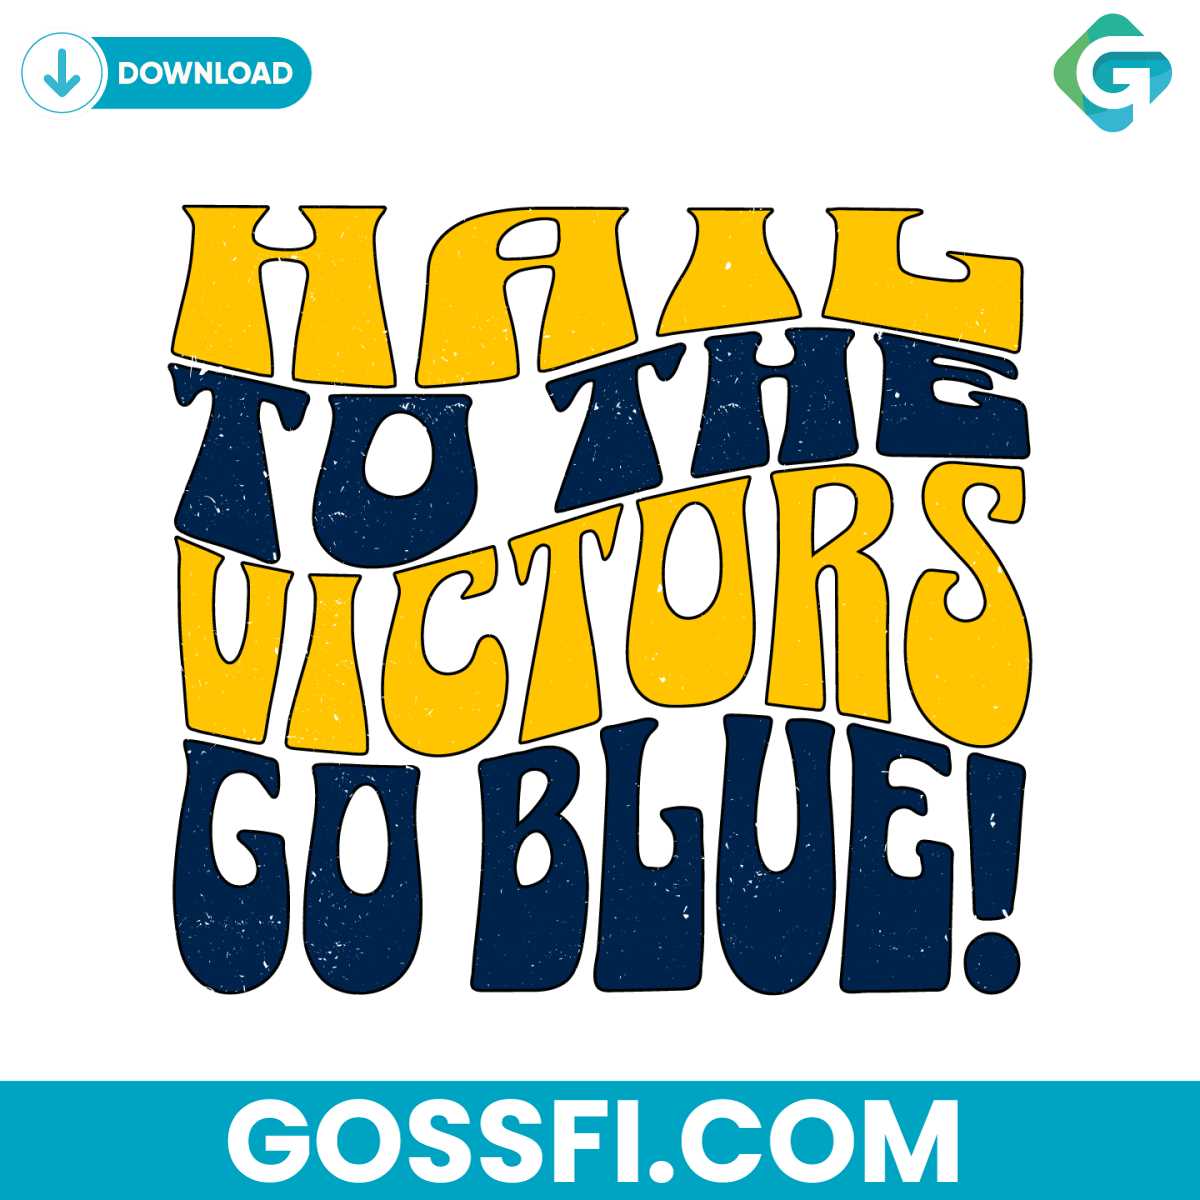 hail-to-the-victors-go-blue-michigan-wolverines-svg